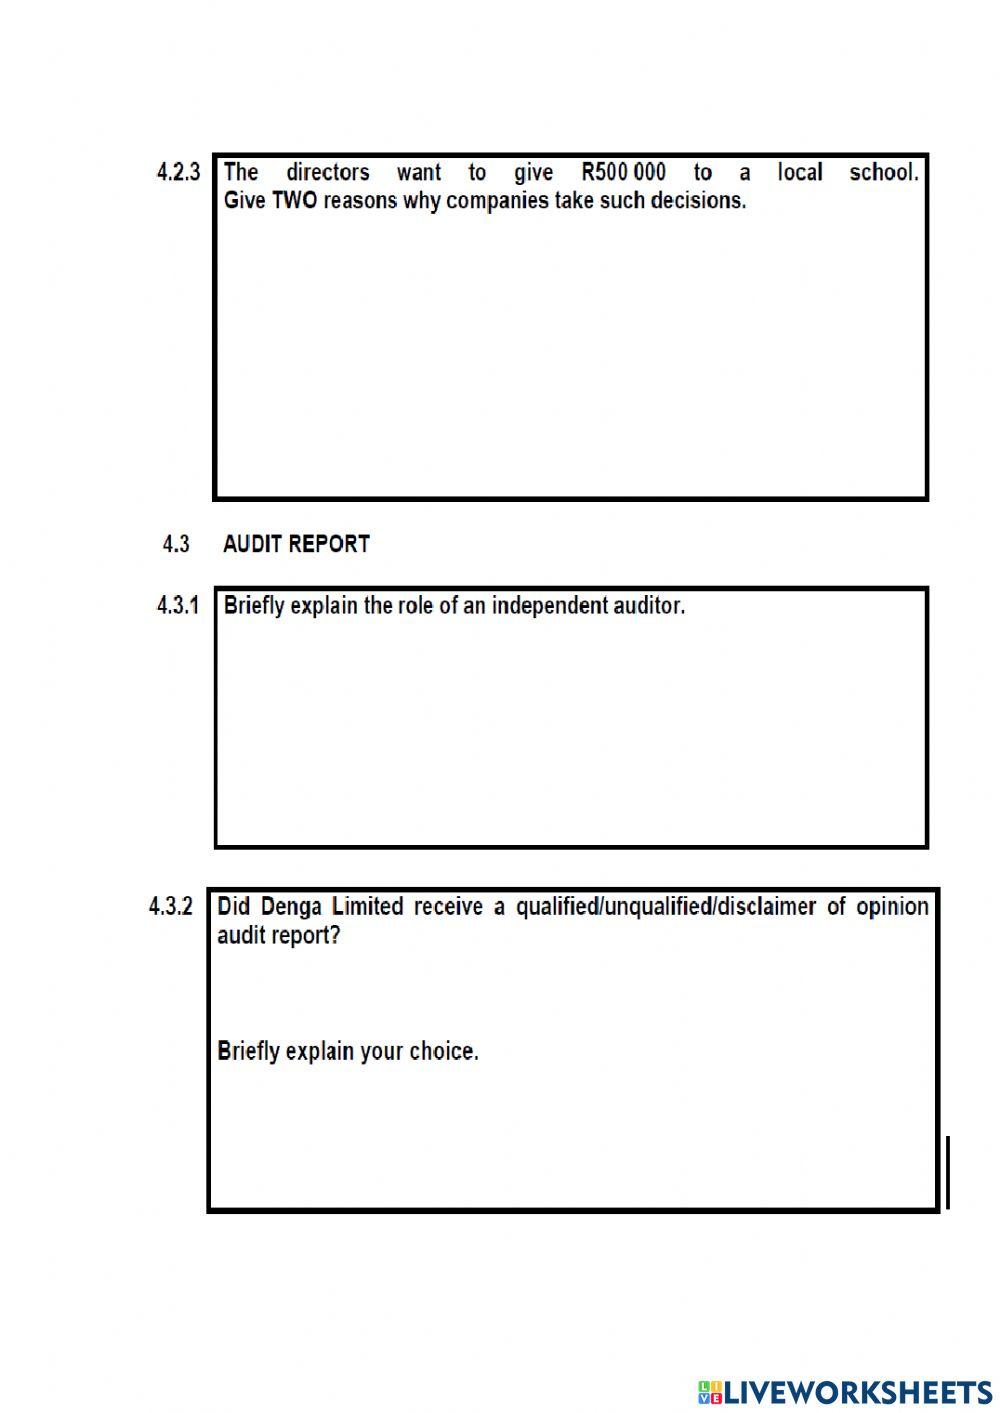 Question 4 Balance sheet and Audit report